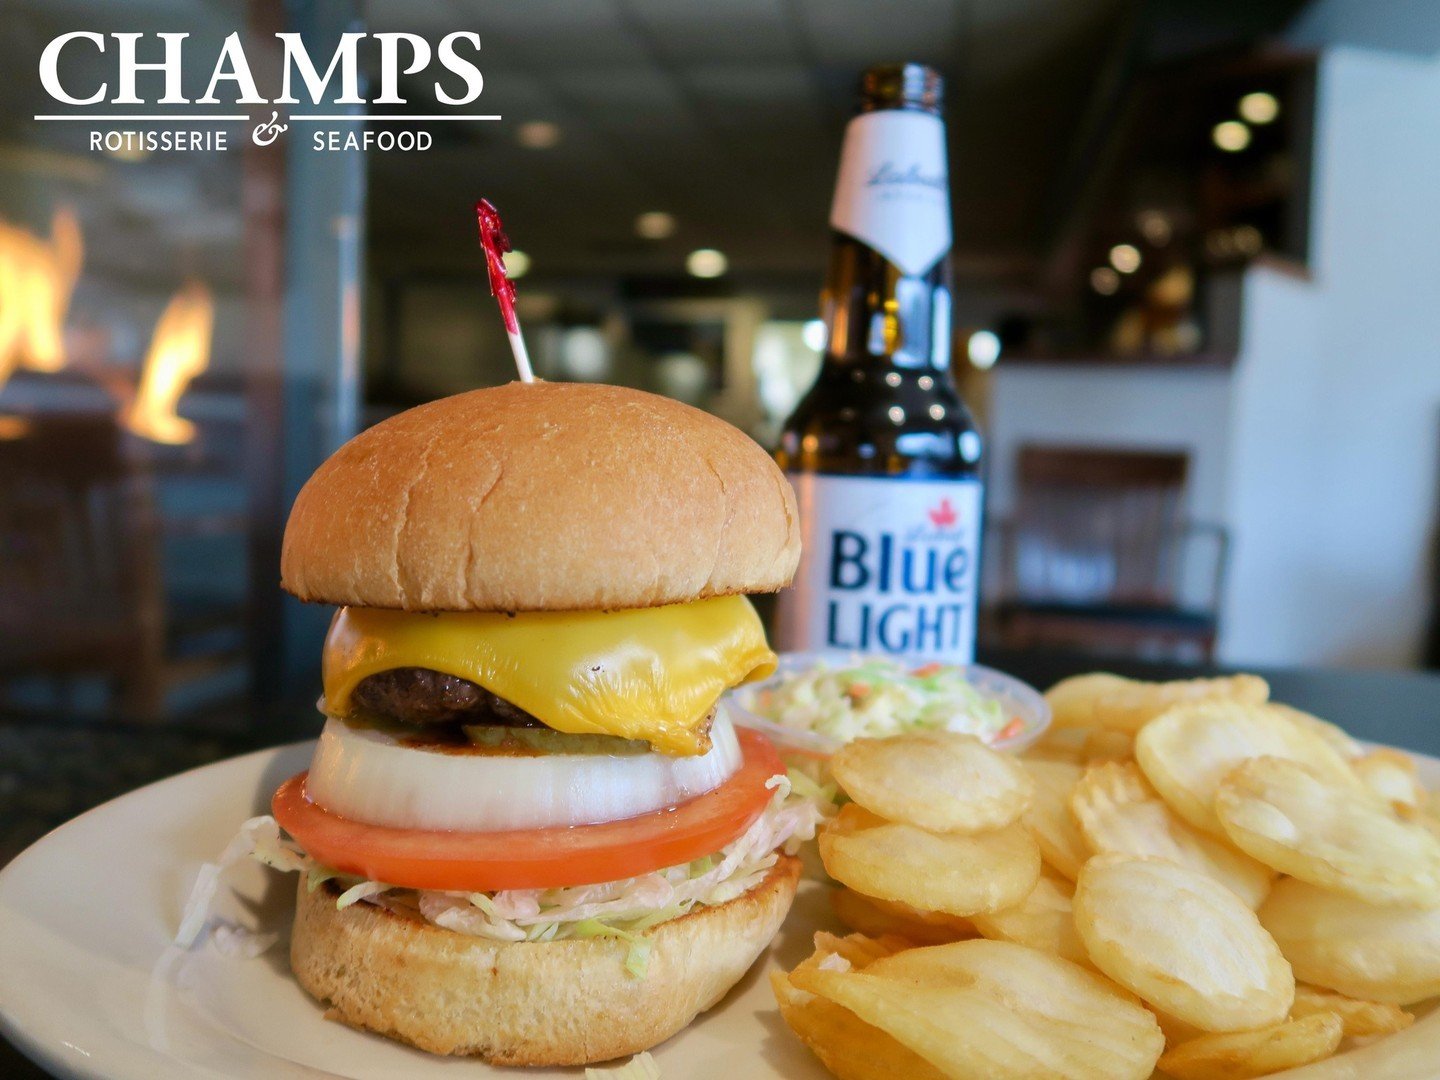 Hungry? Visit Champs for tasty meals!